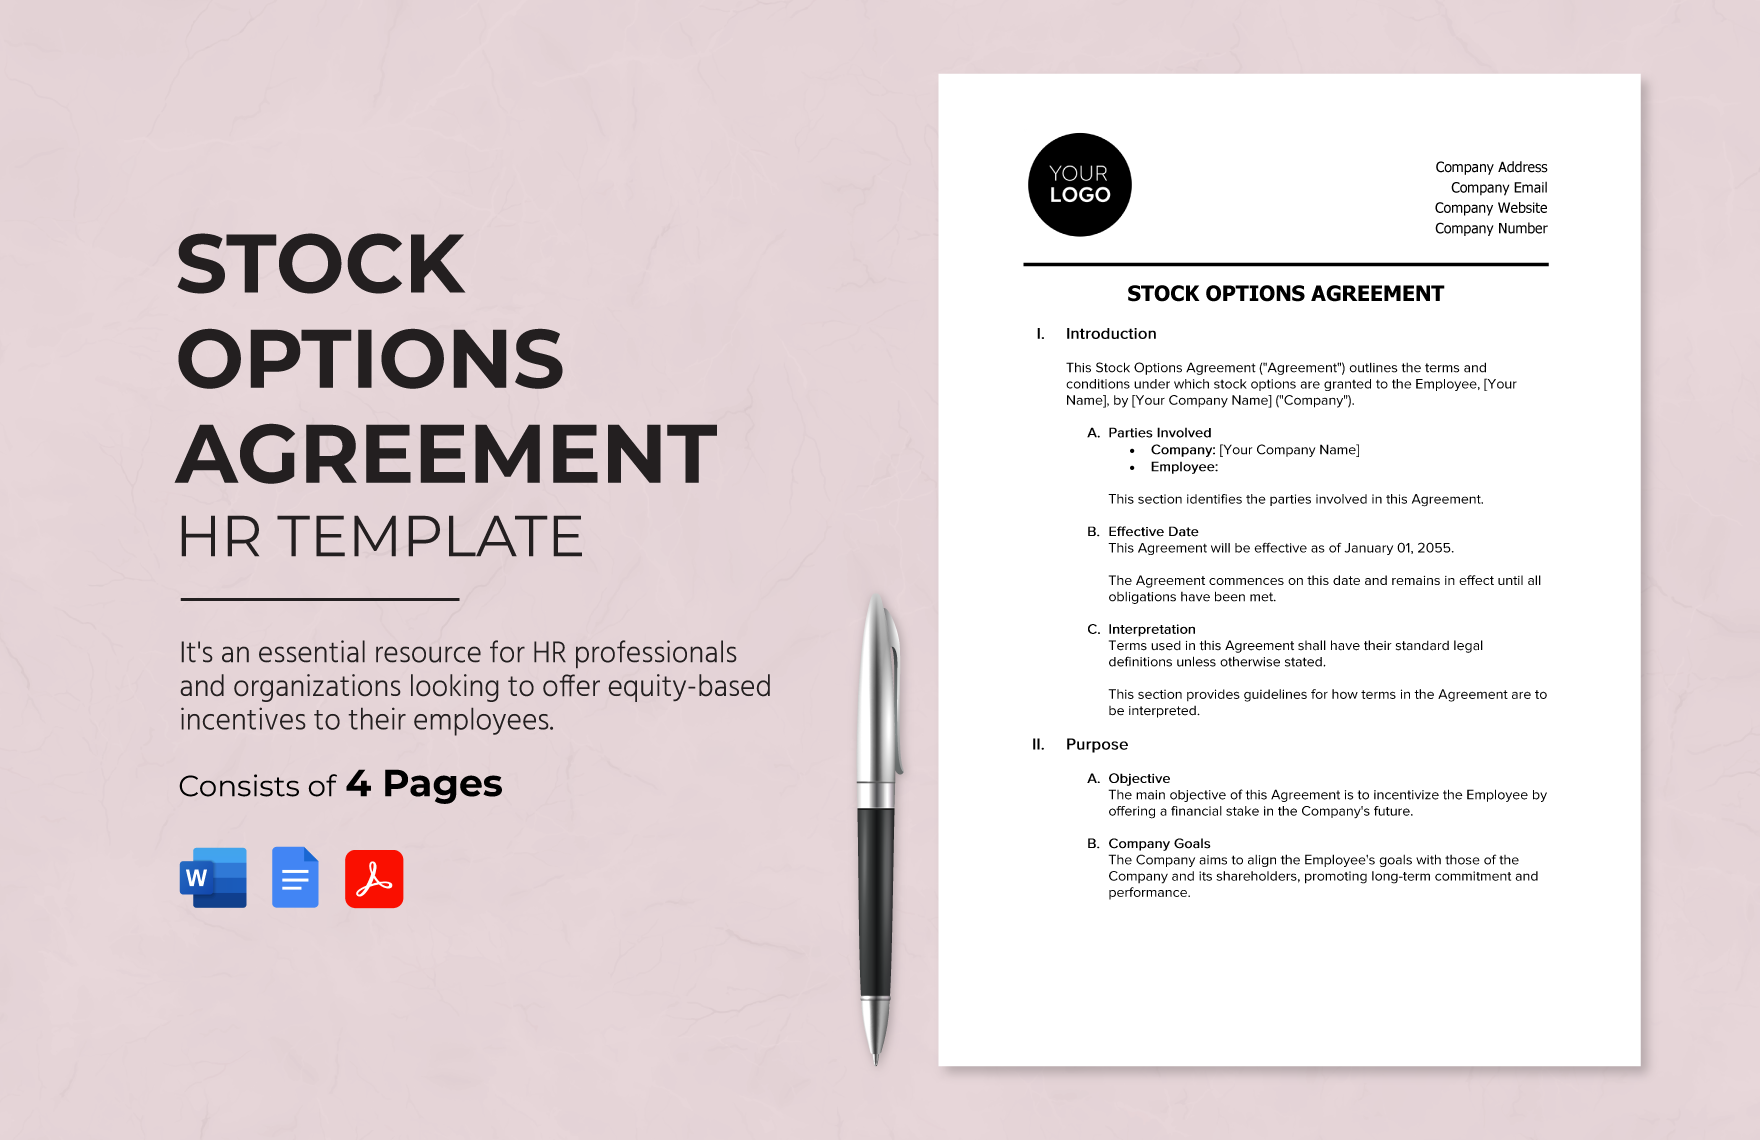 Stock Options Agreement HR Template